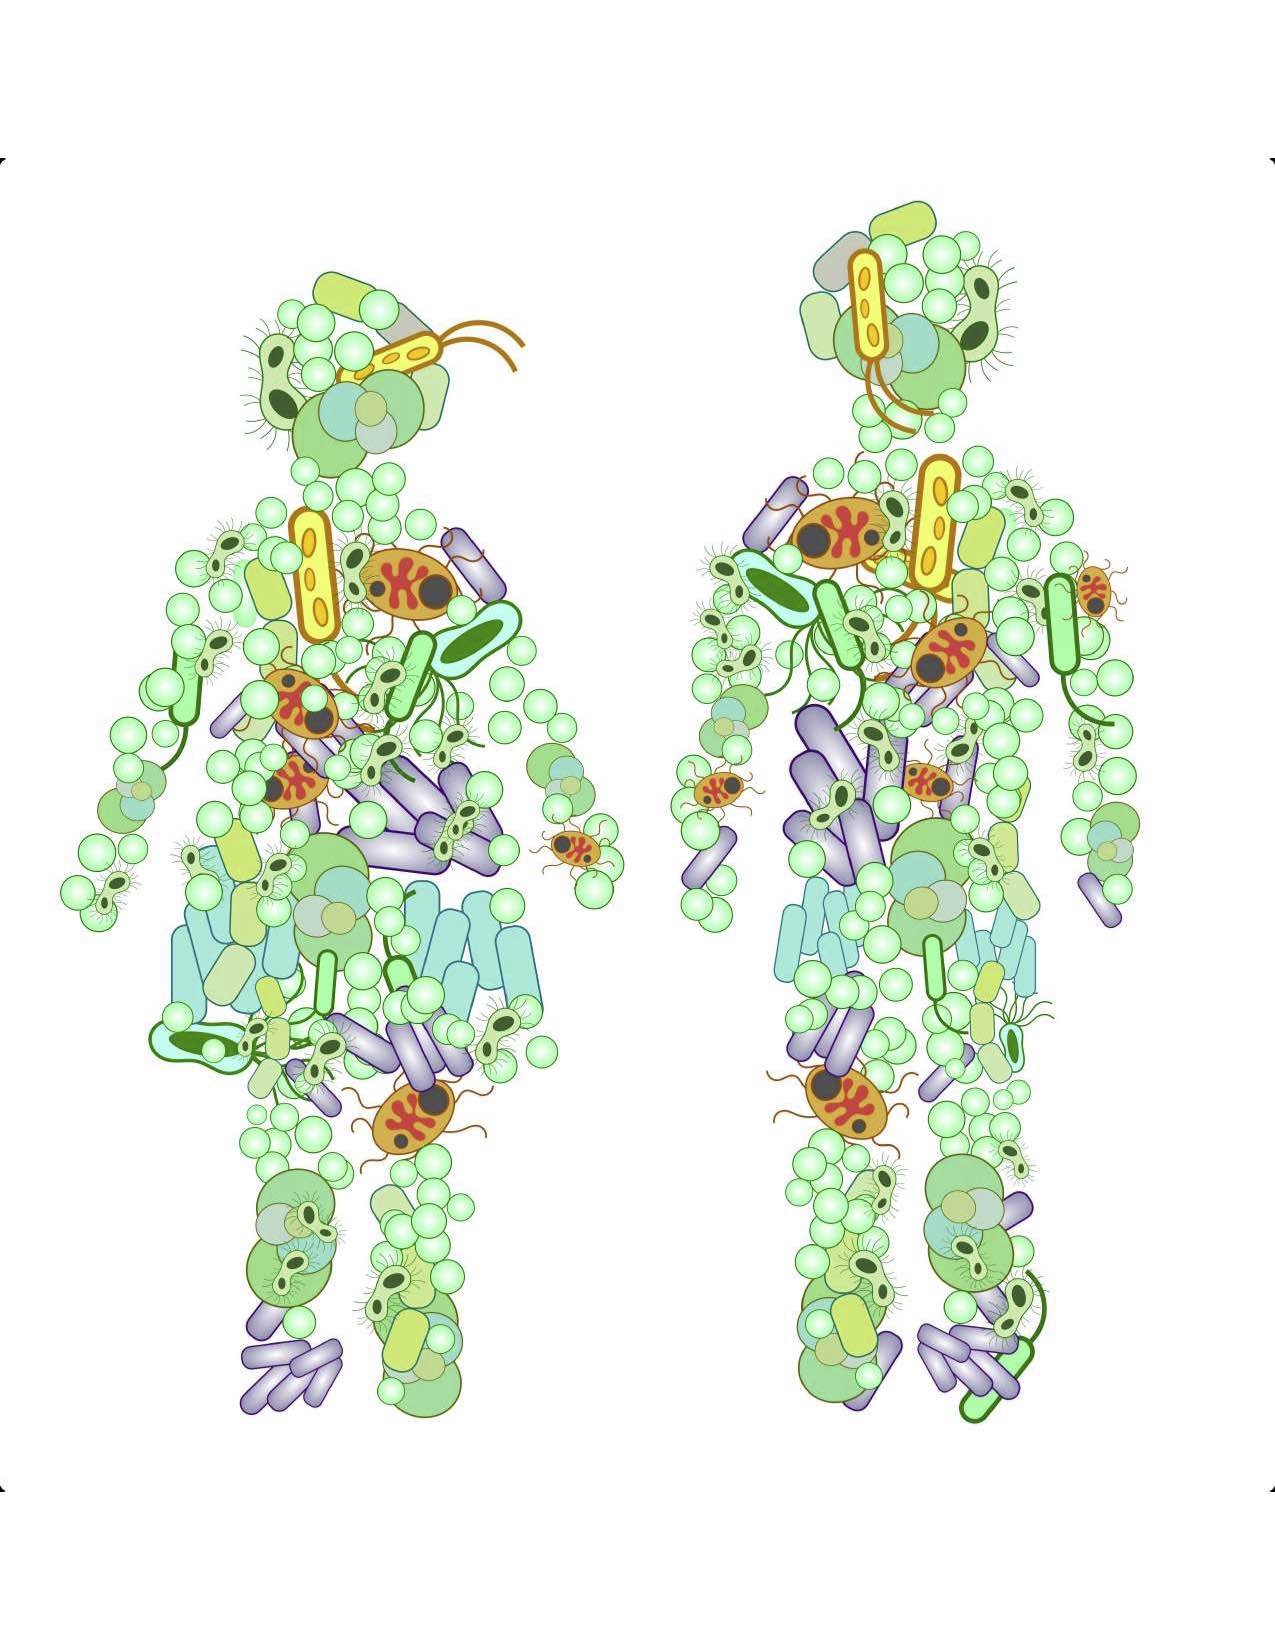 Illustration of green, blue, purple, and yellow microbes in the shape of two human bodies coded as female and male (one shorter and with a dress).